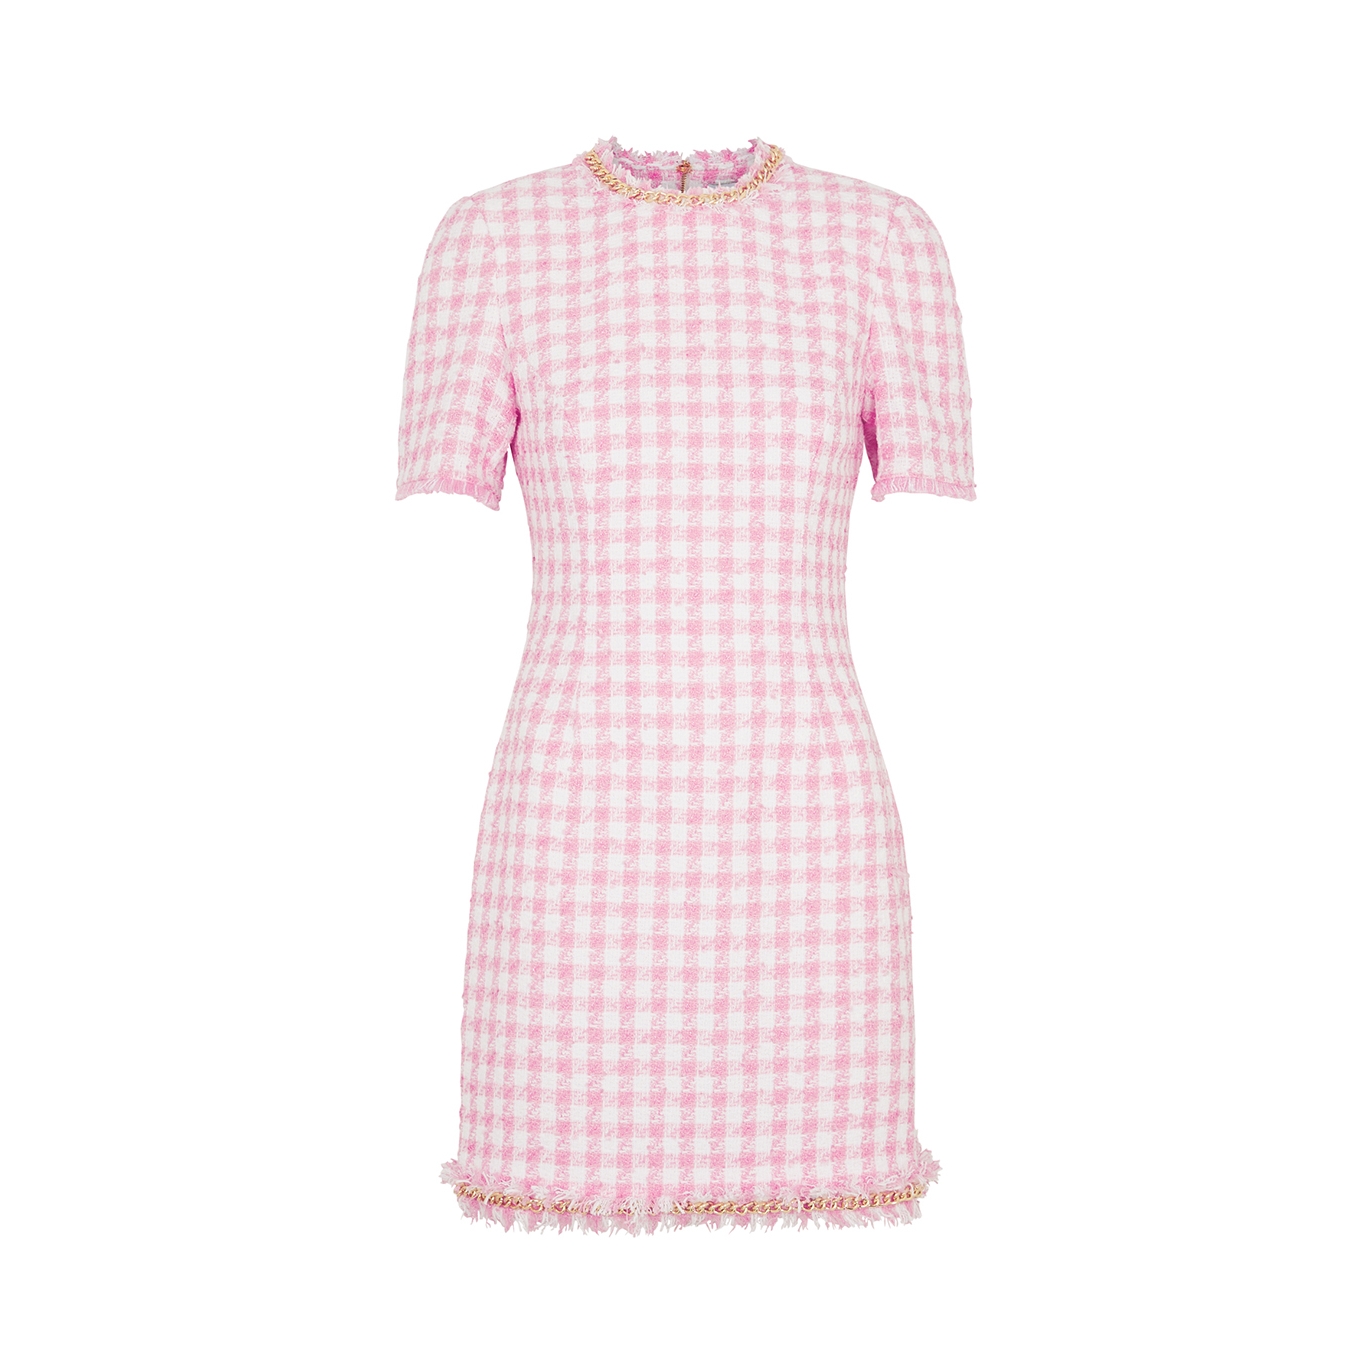 Rebecca Vallance Checked Tweed Mini Dress - Pink And White - 8